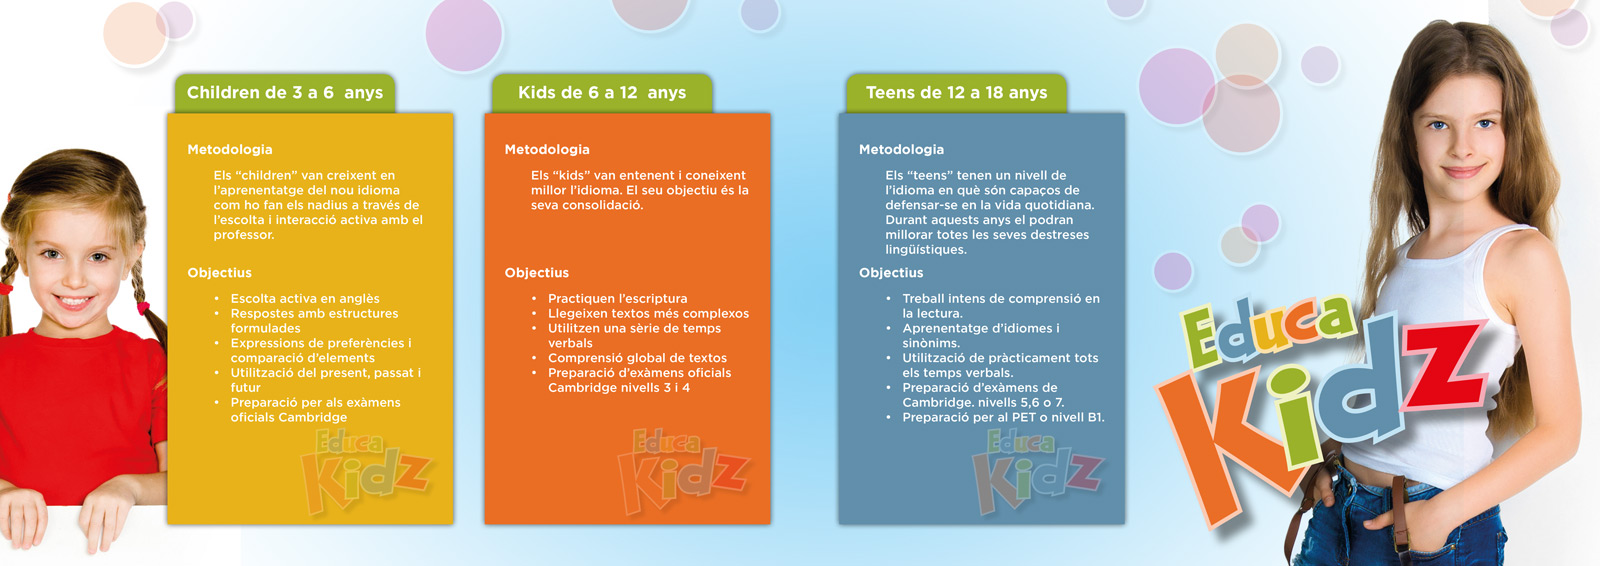 Layout and creative graphic design for educational center magazine for language teaching for children EDUCAKIDZ